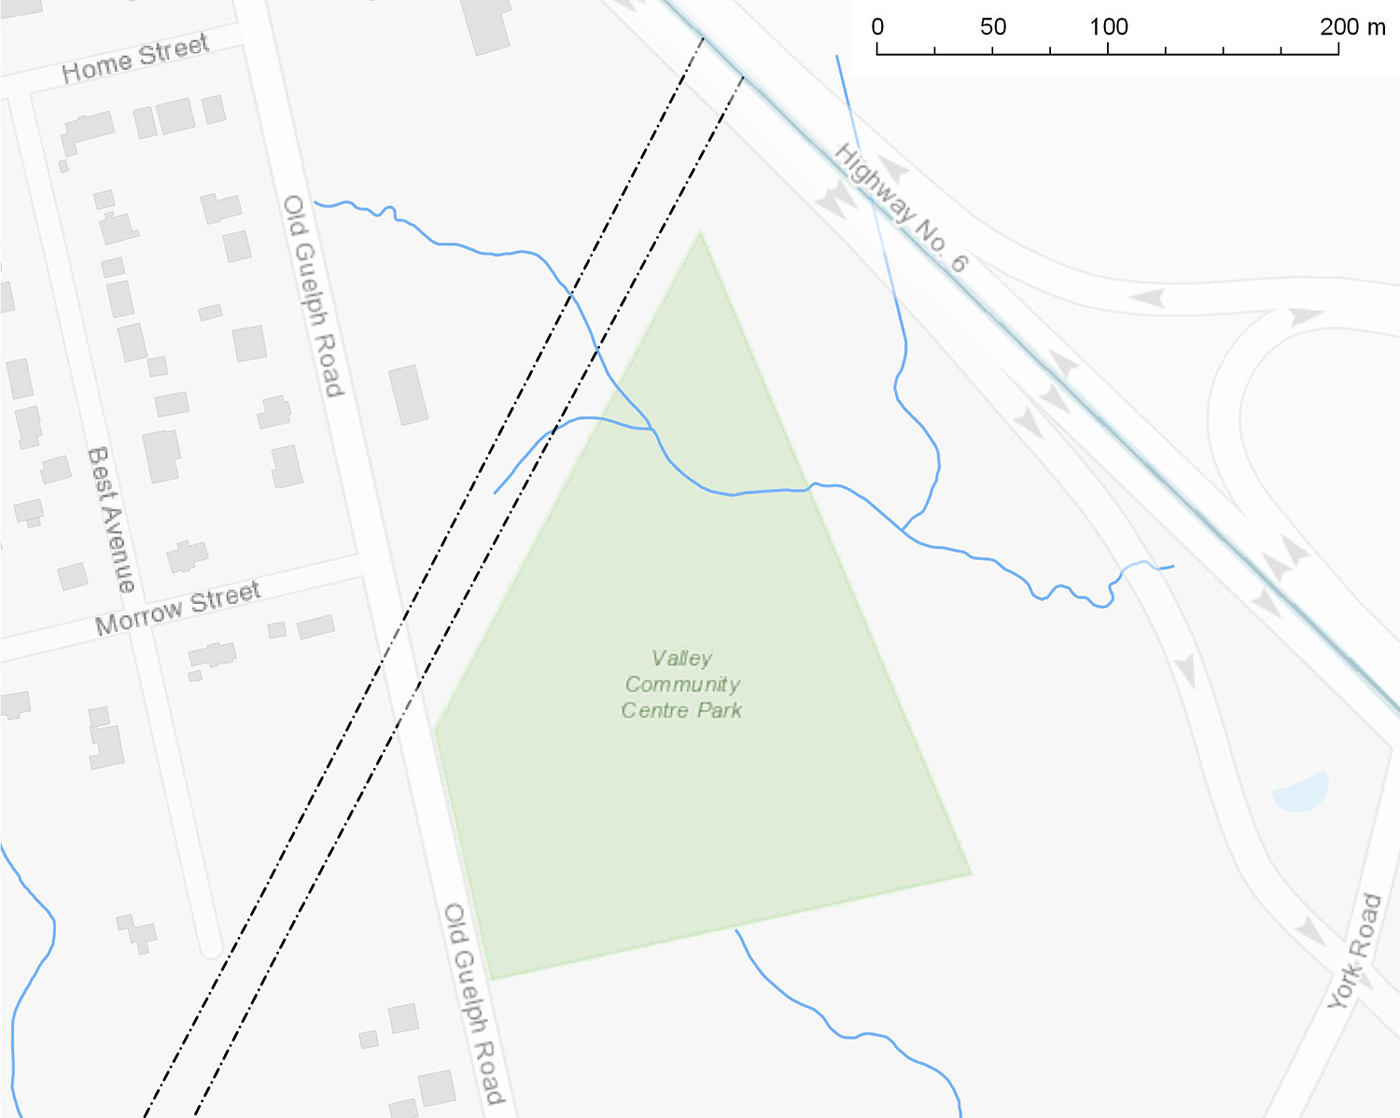 Map of Valley Community Centre Park